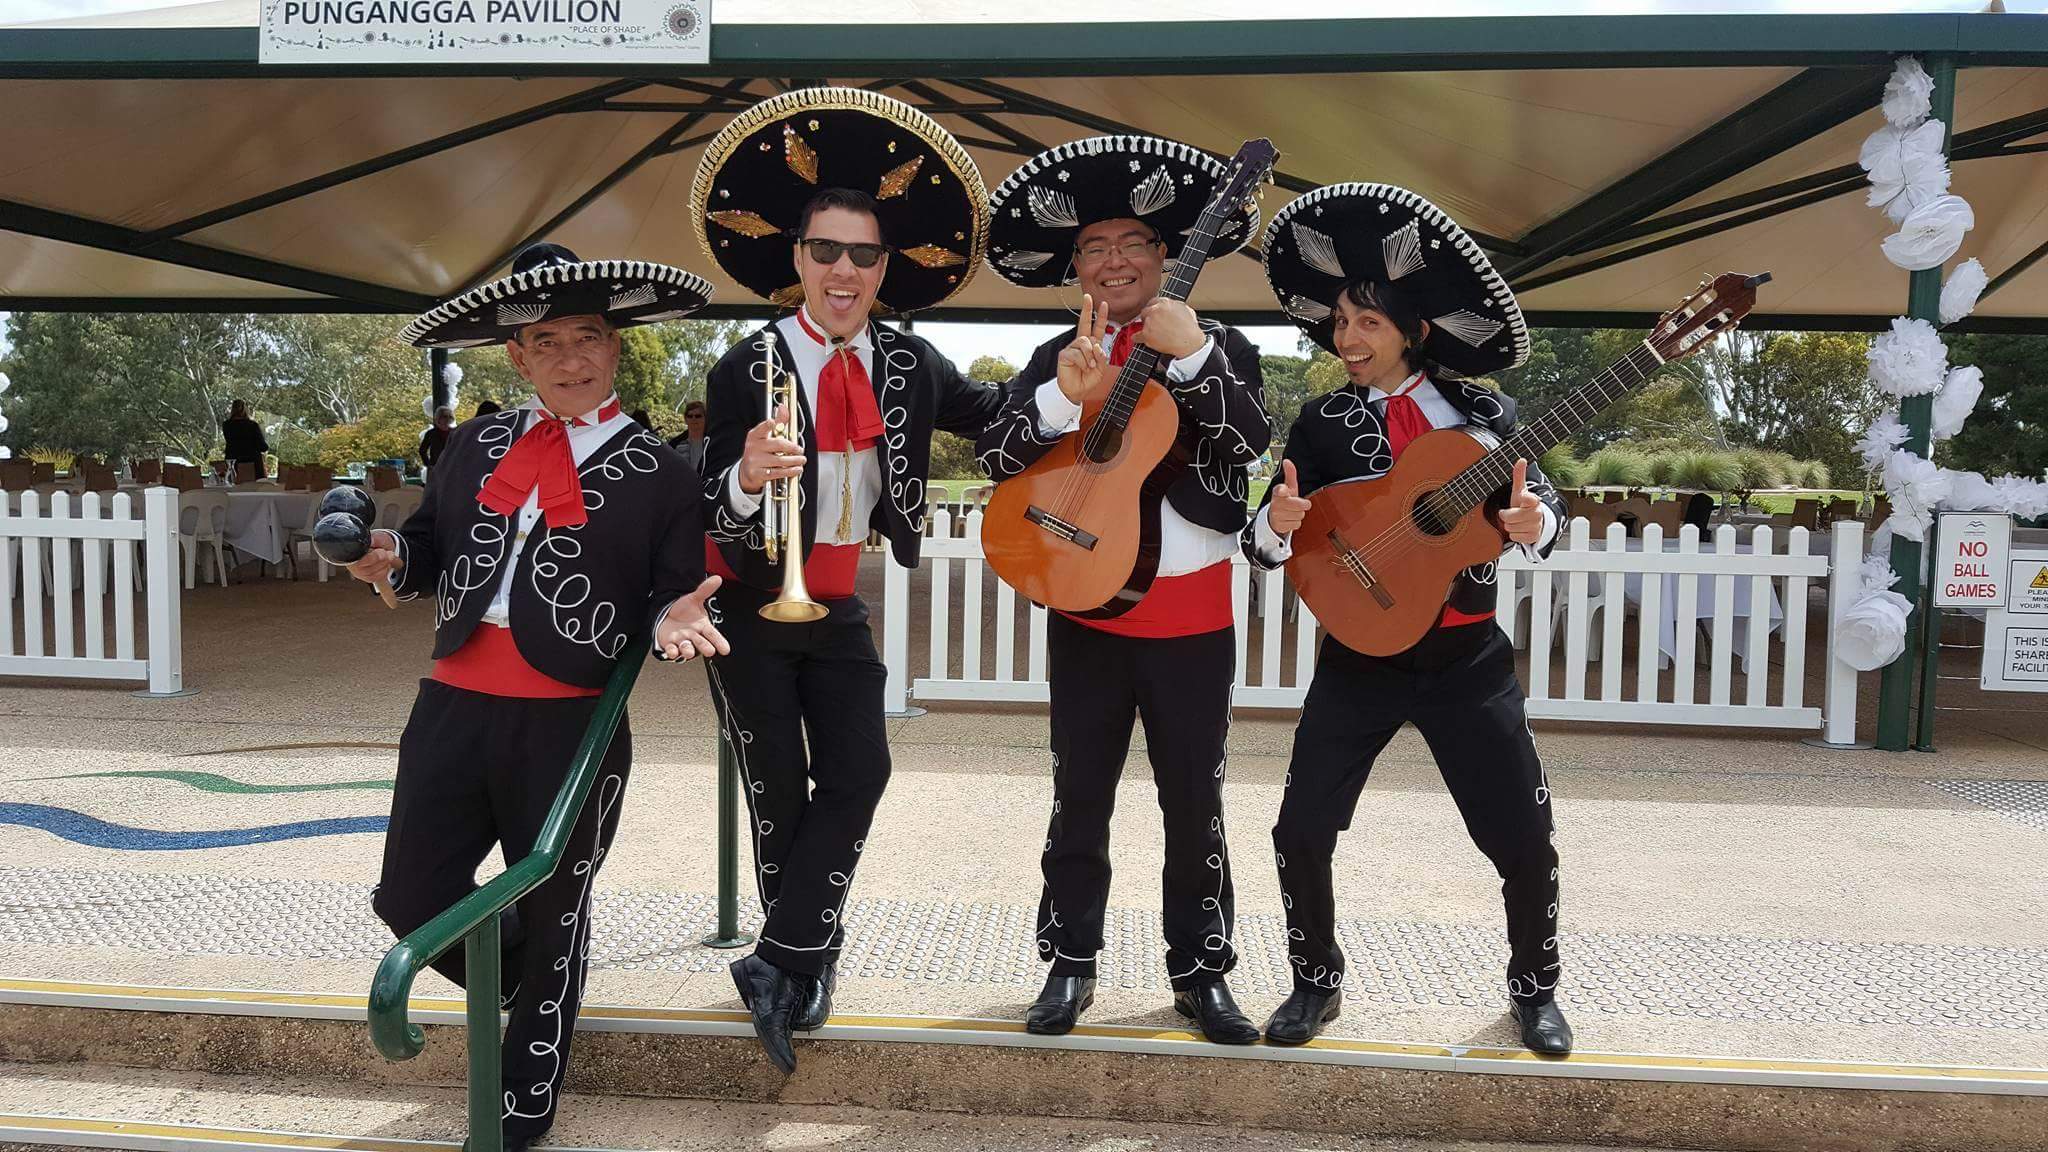 thorndon-park-birthday-events-mexican-theme-adelaide